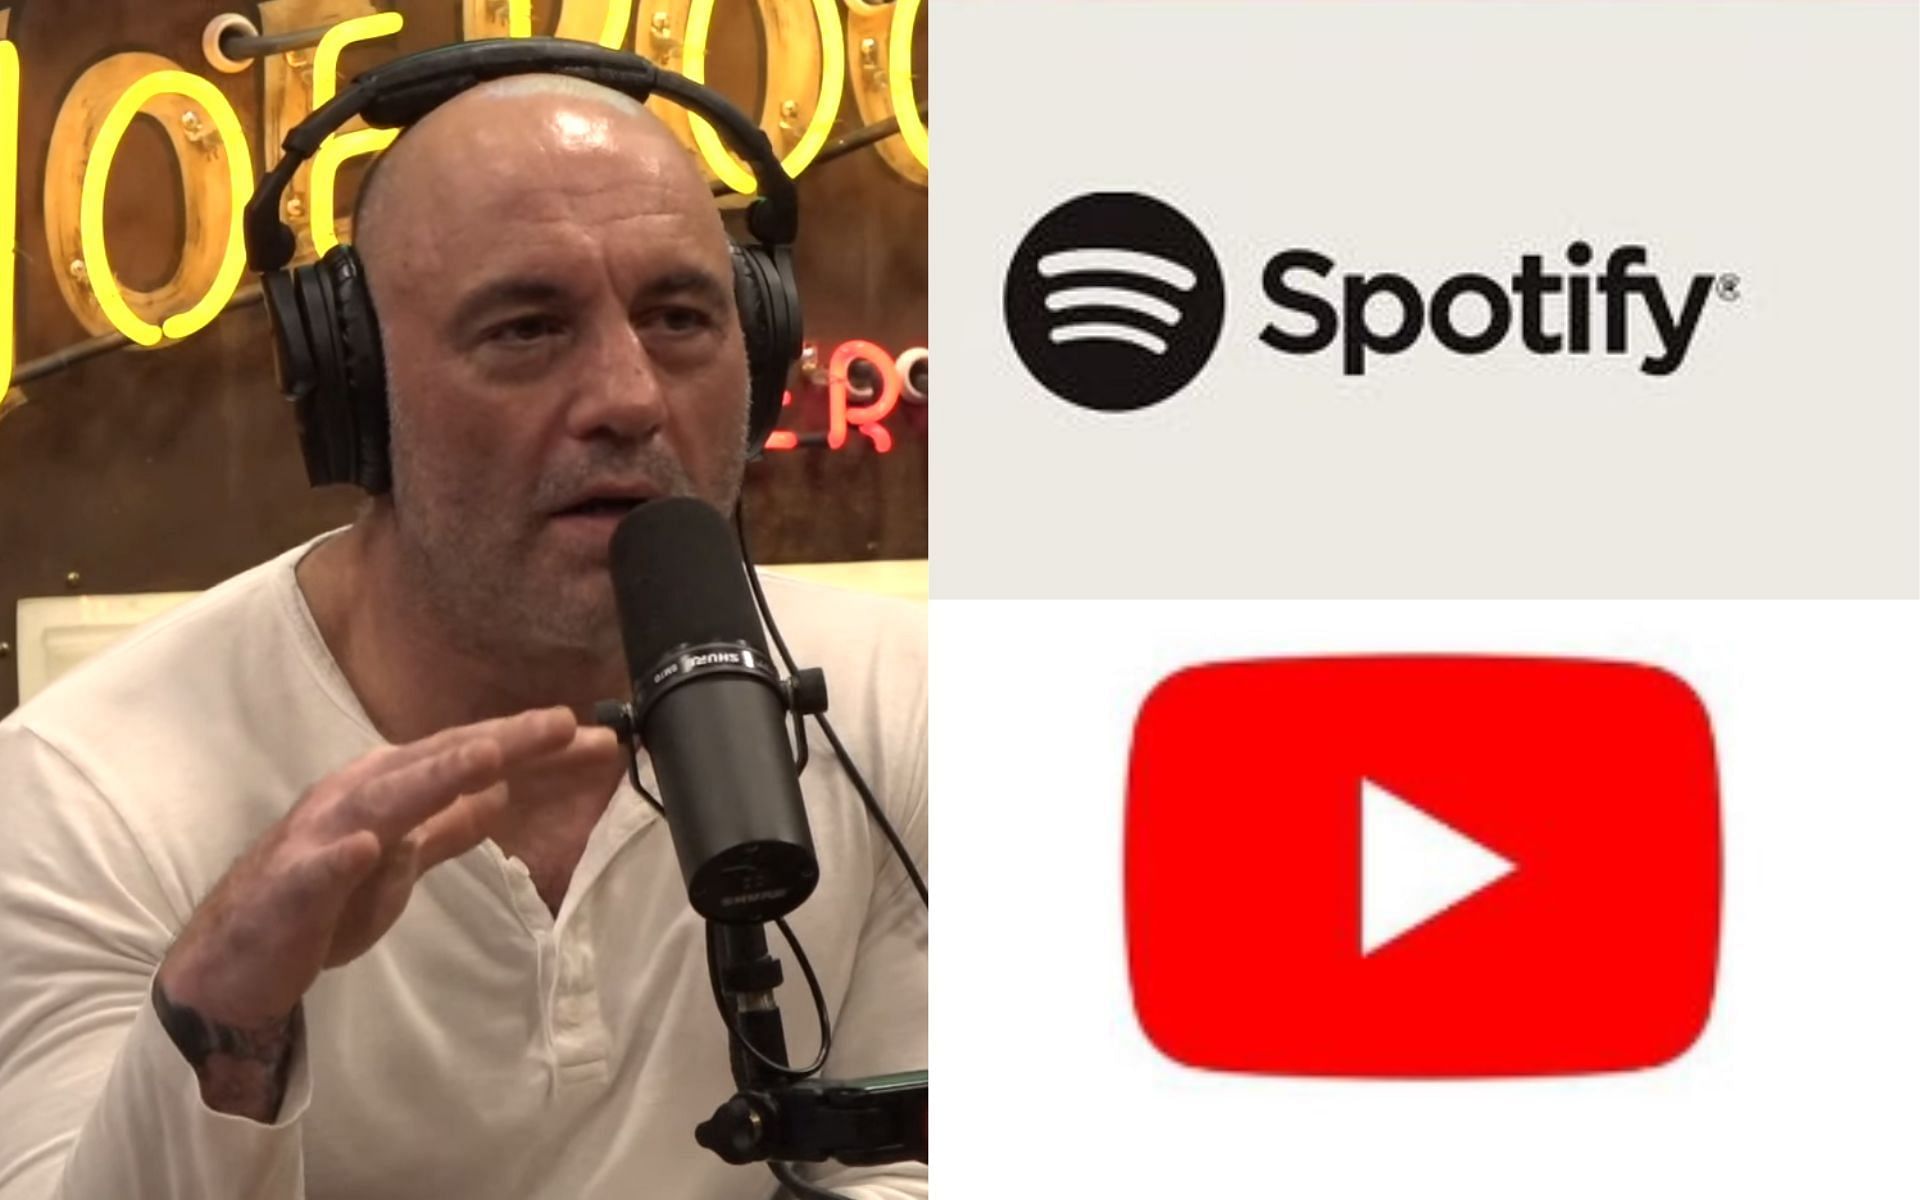 Joe Rogan (left) Spotify logo (top right) YouTube logo (bottom right) (image courtesy @youtube @spotify Instagram and @JRE Spotify)